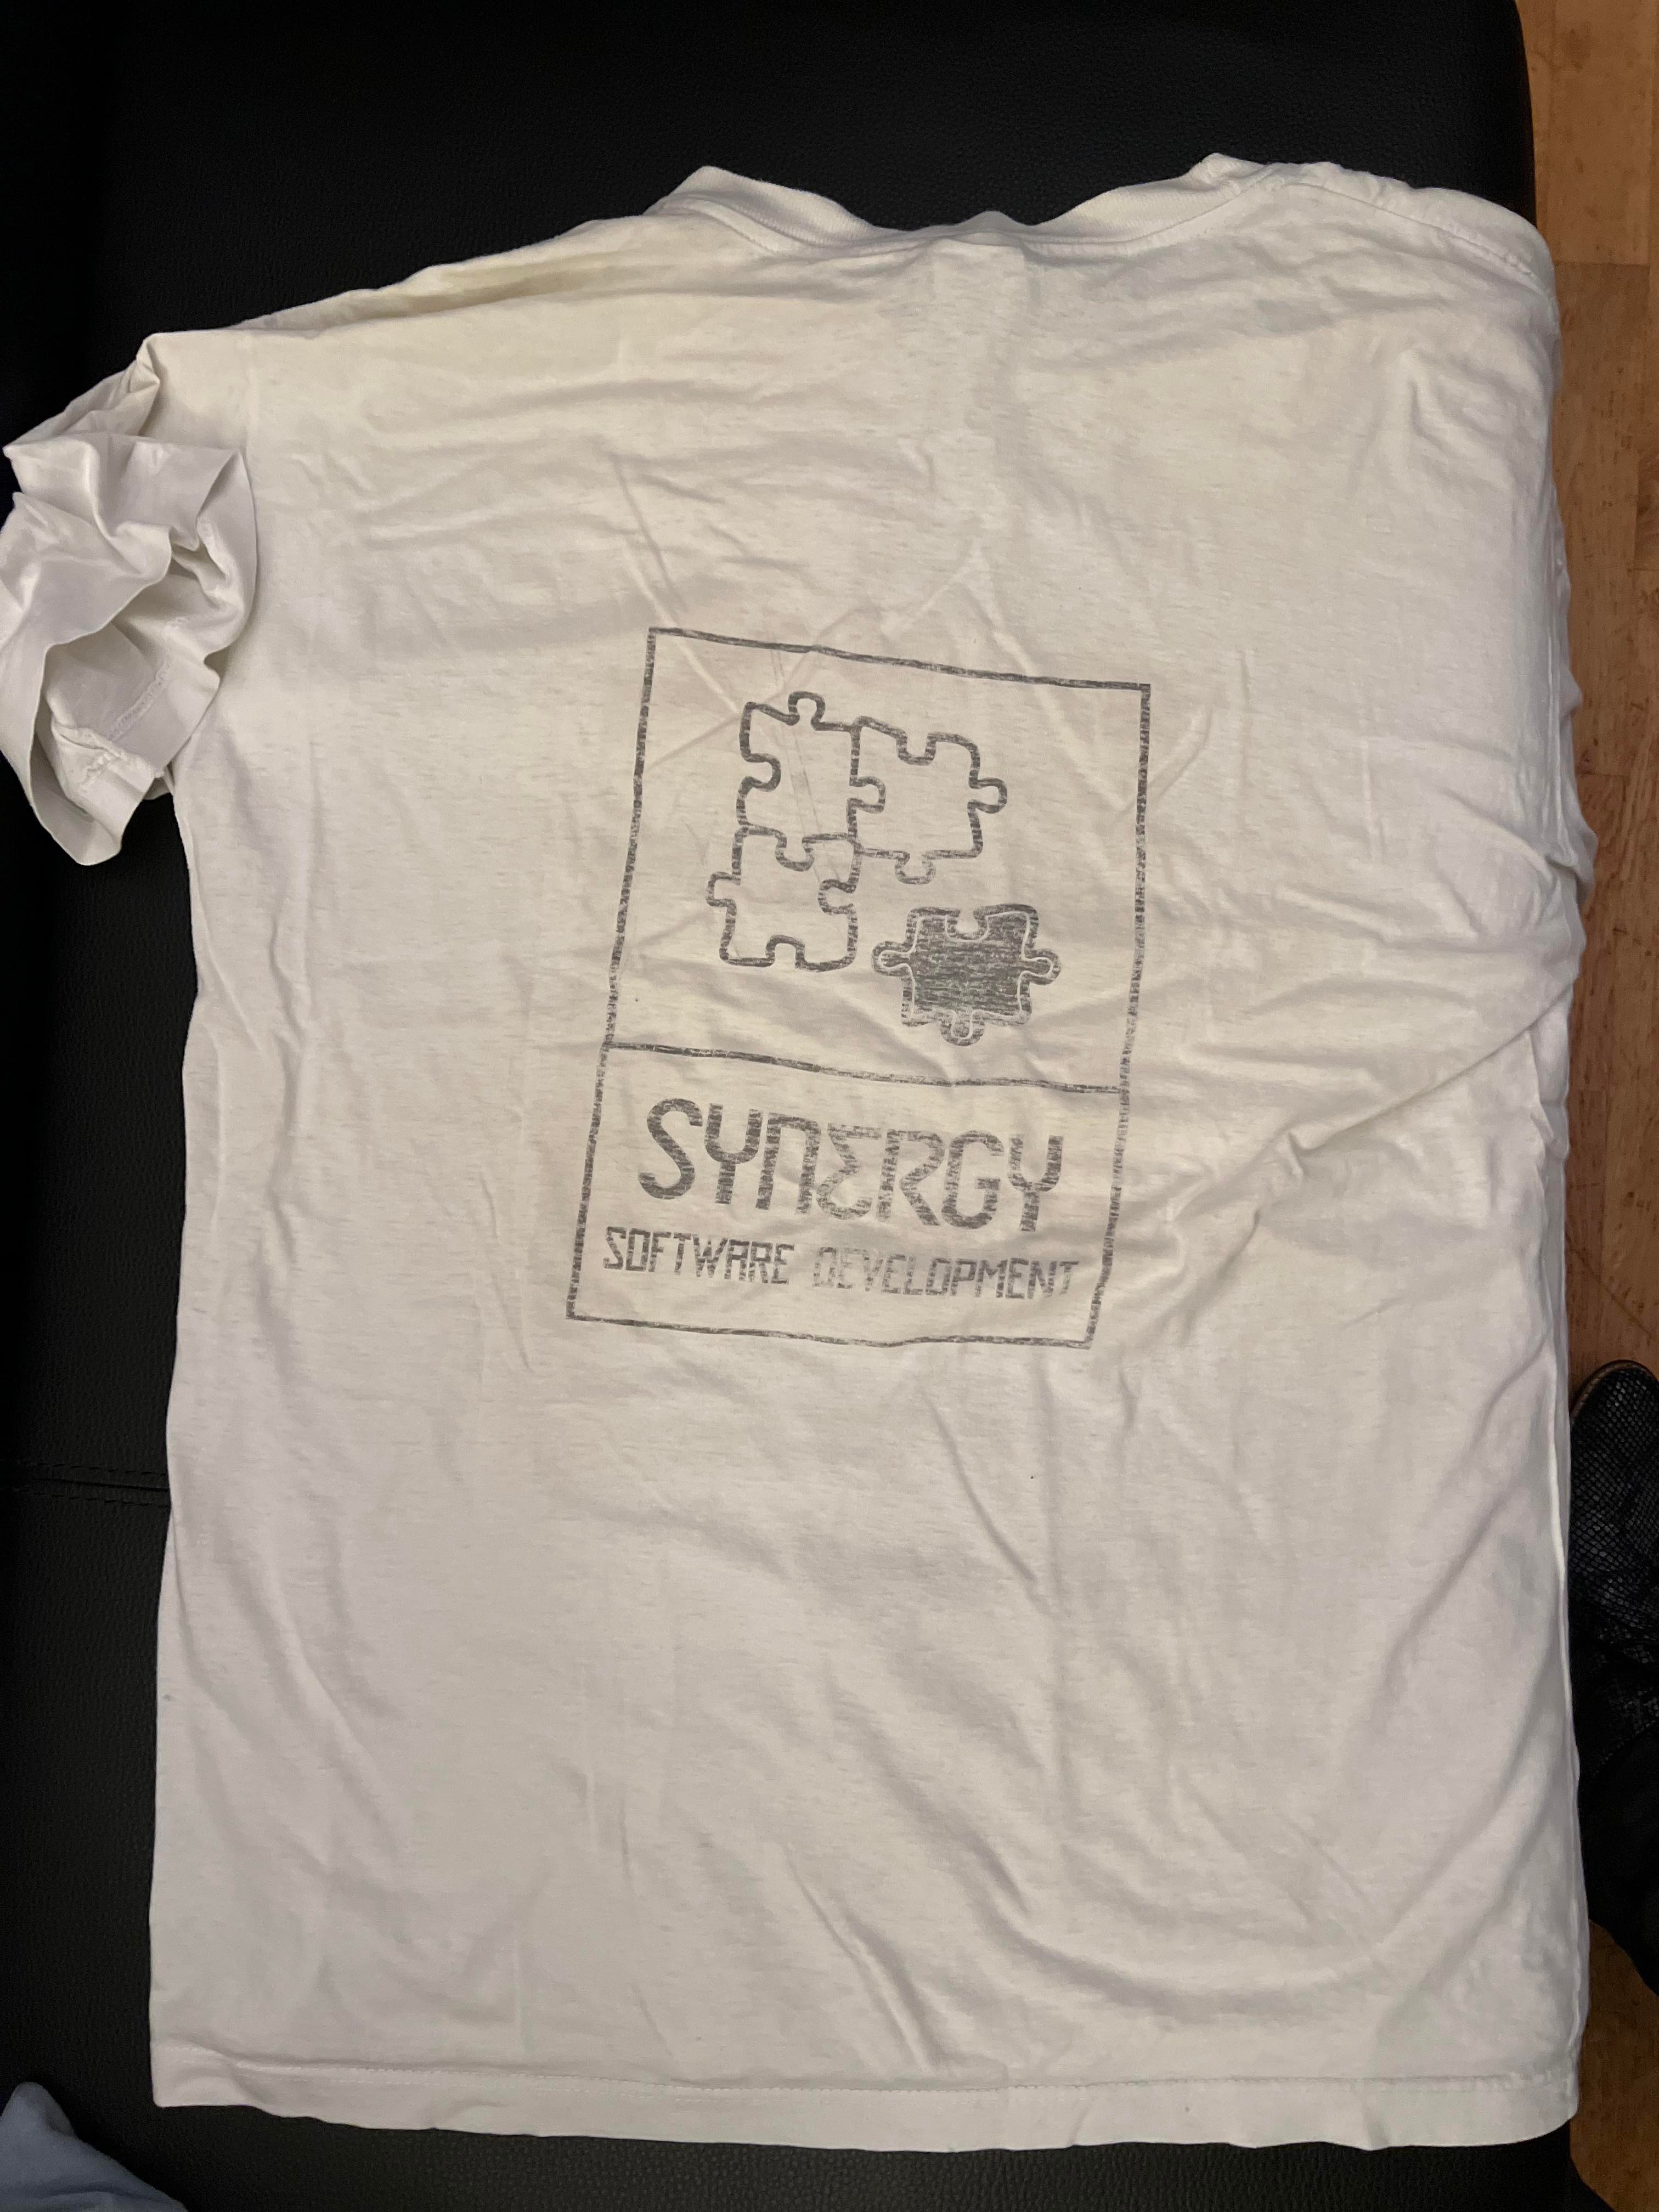 The original Synergy member T-shirt. This one is from Wingleader.